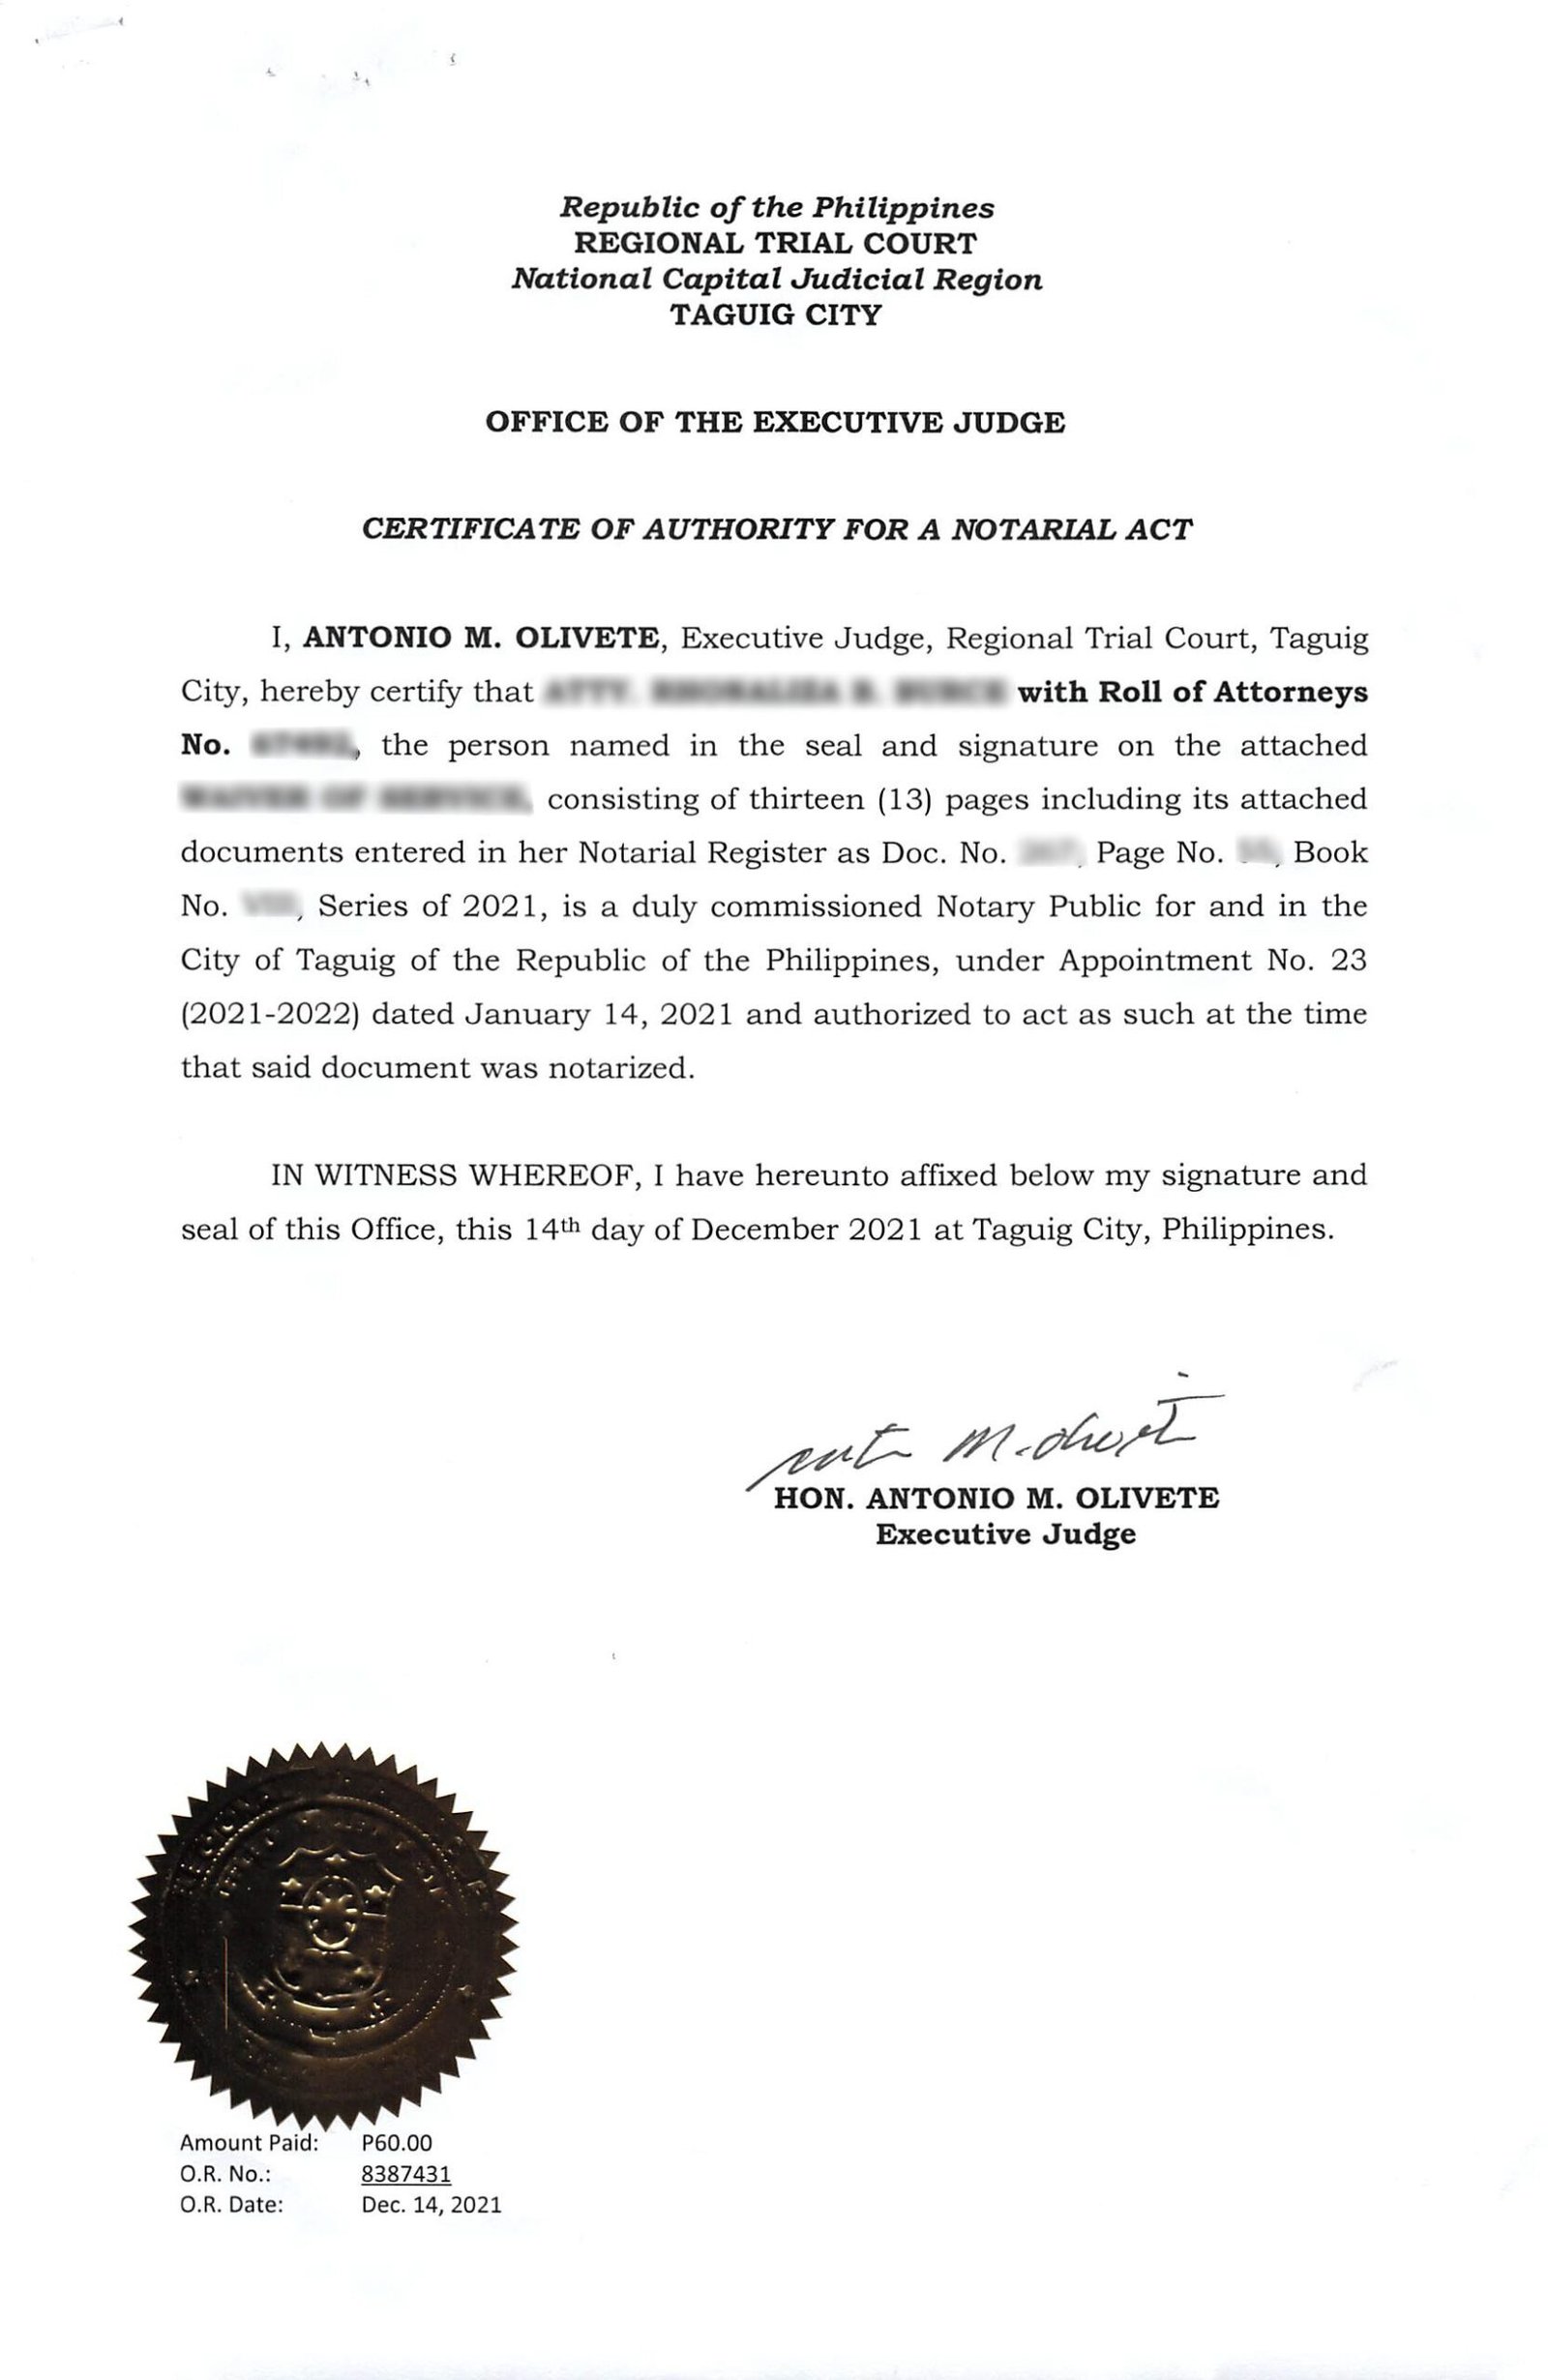 Certificate of Authority for a Notarial Act Processing in the